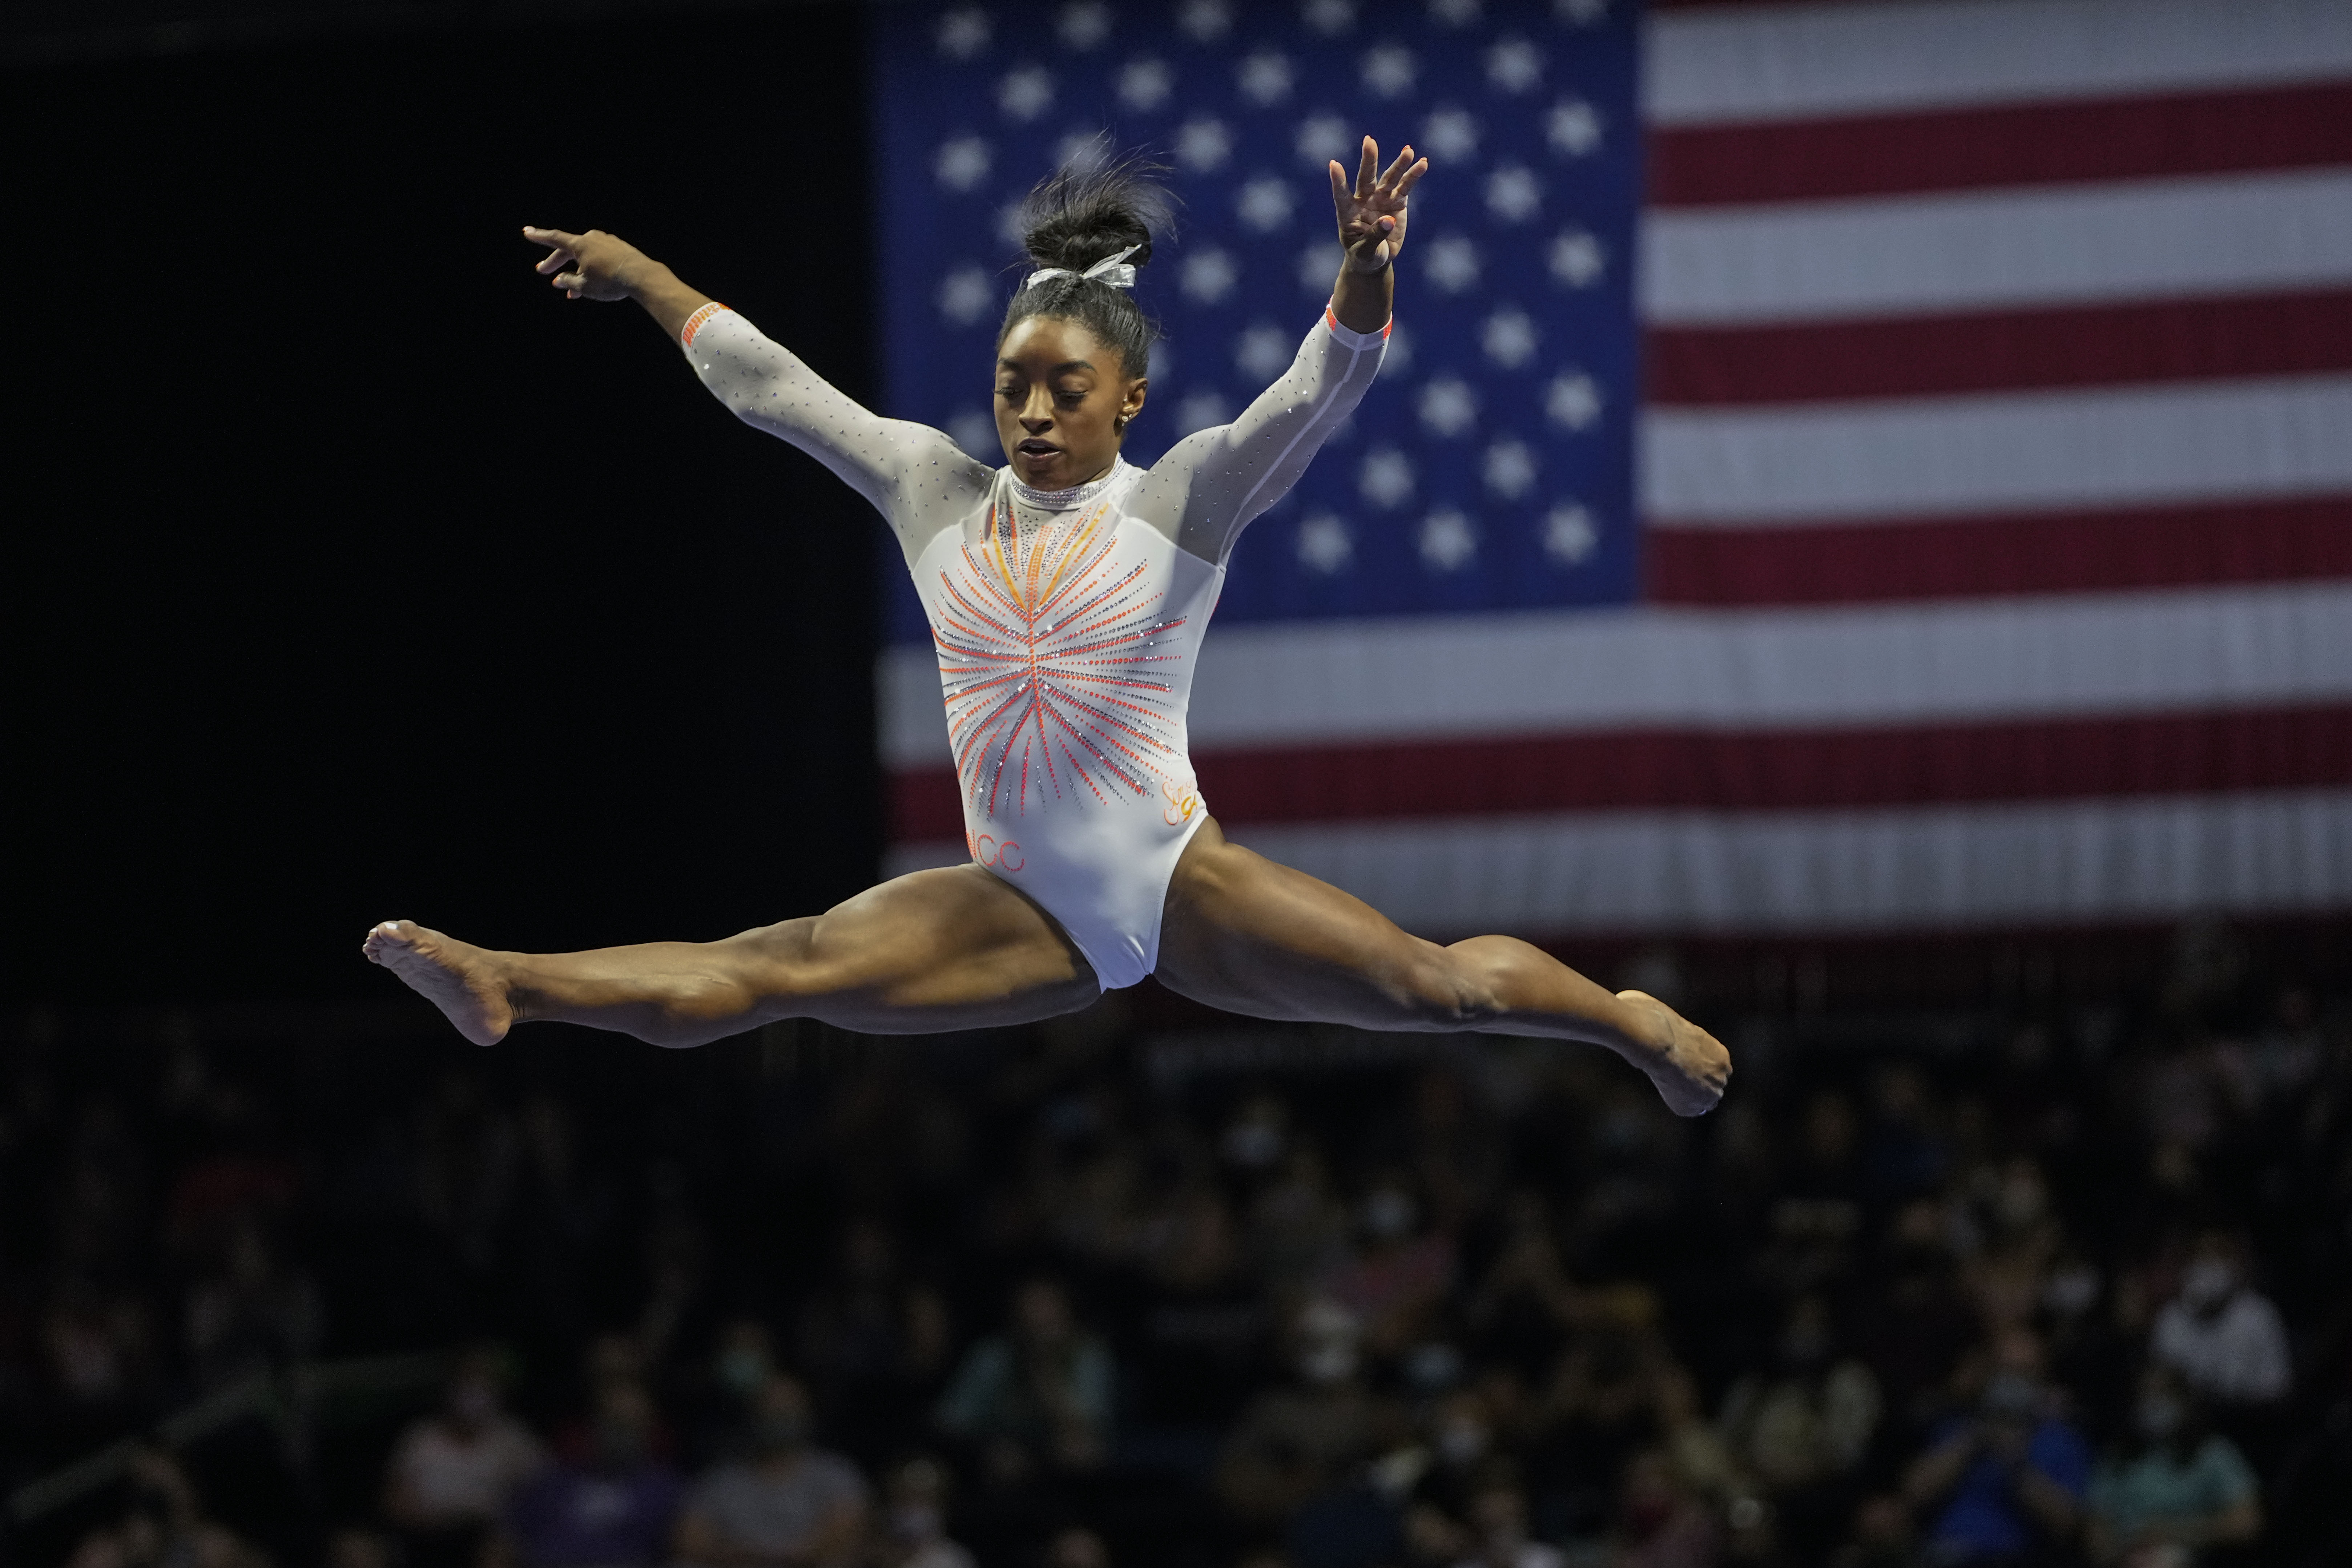 USA Gymnastics on X: In a league of their own! 🥇 The US Women